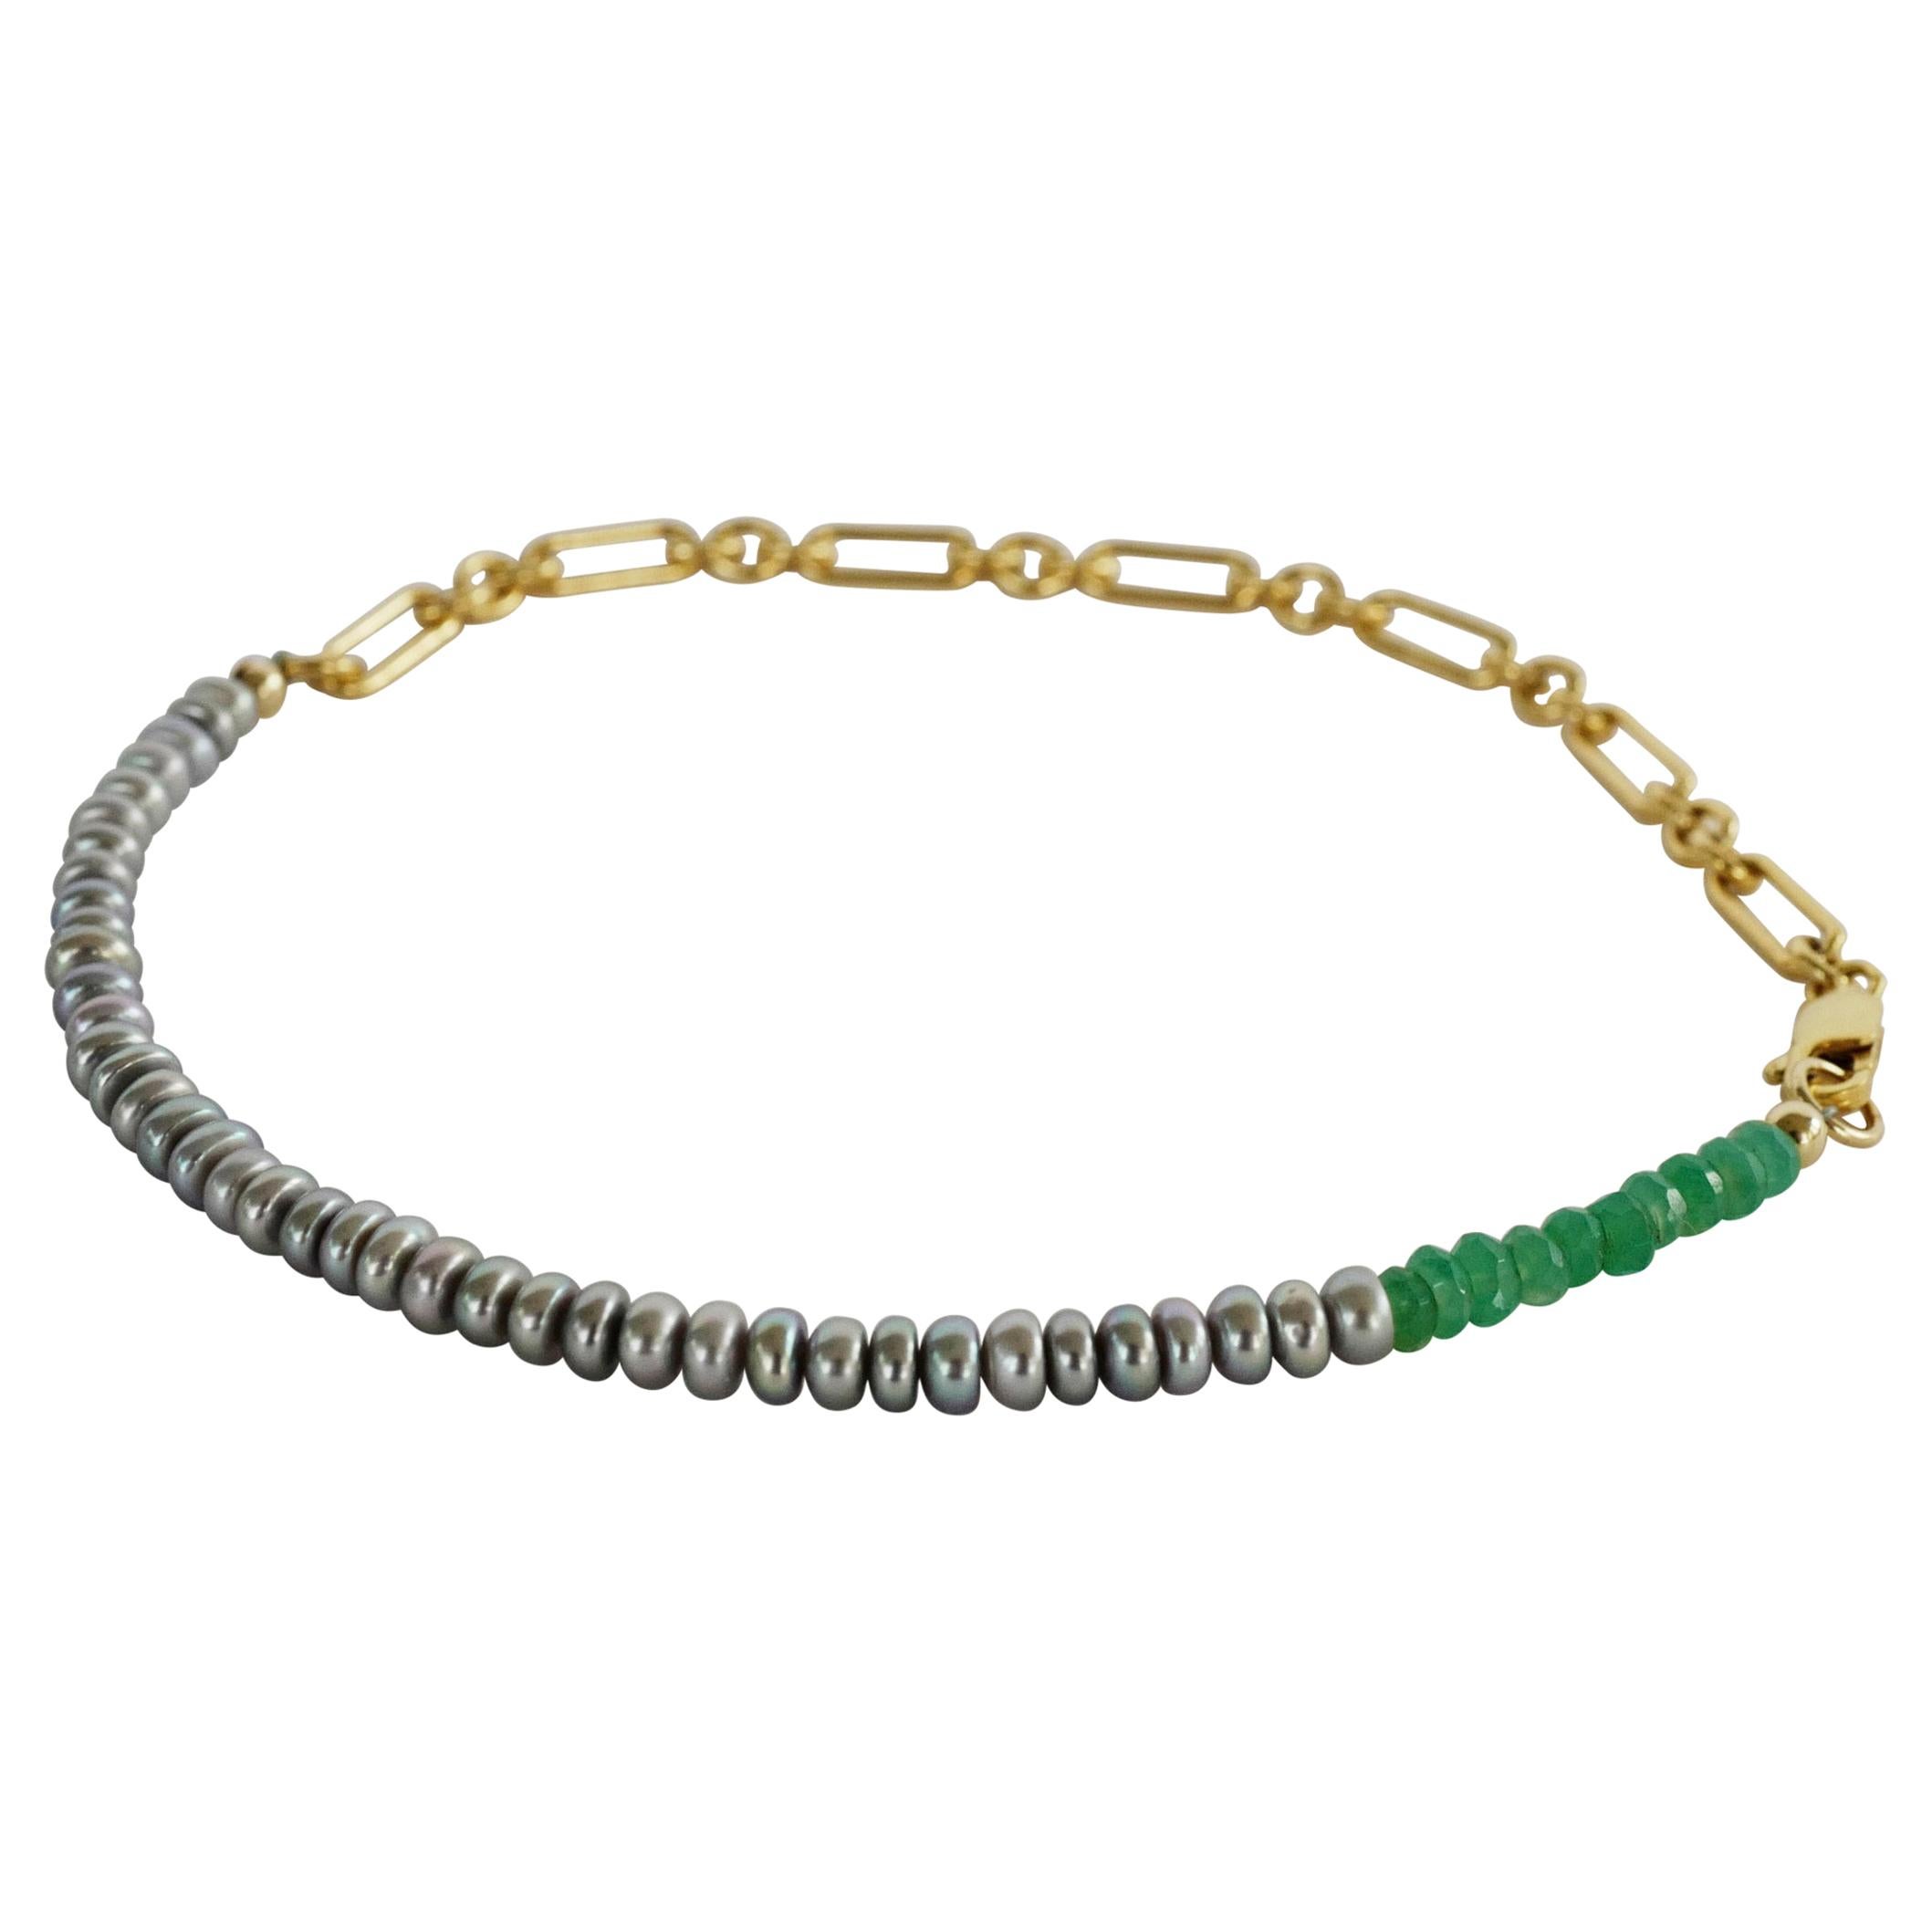 Black Pearl Ankle Bracelet Chrysoprase  Beaded Gold Filled Chain J Dauphin For Sale